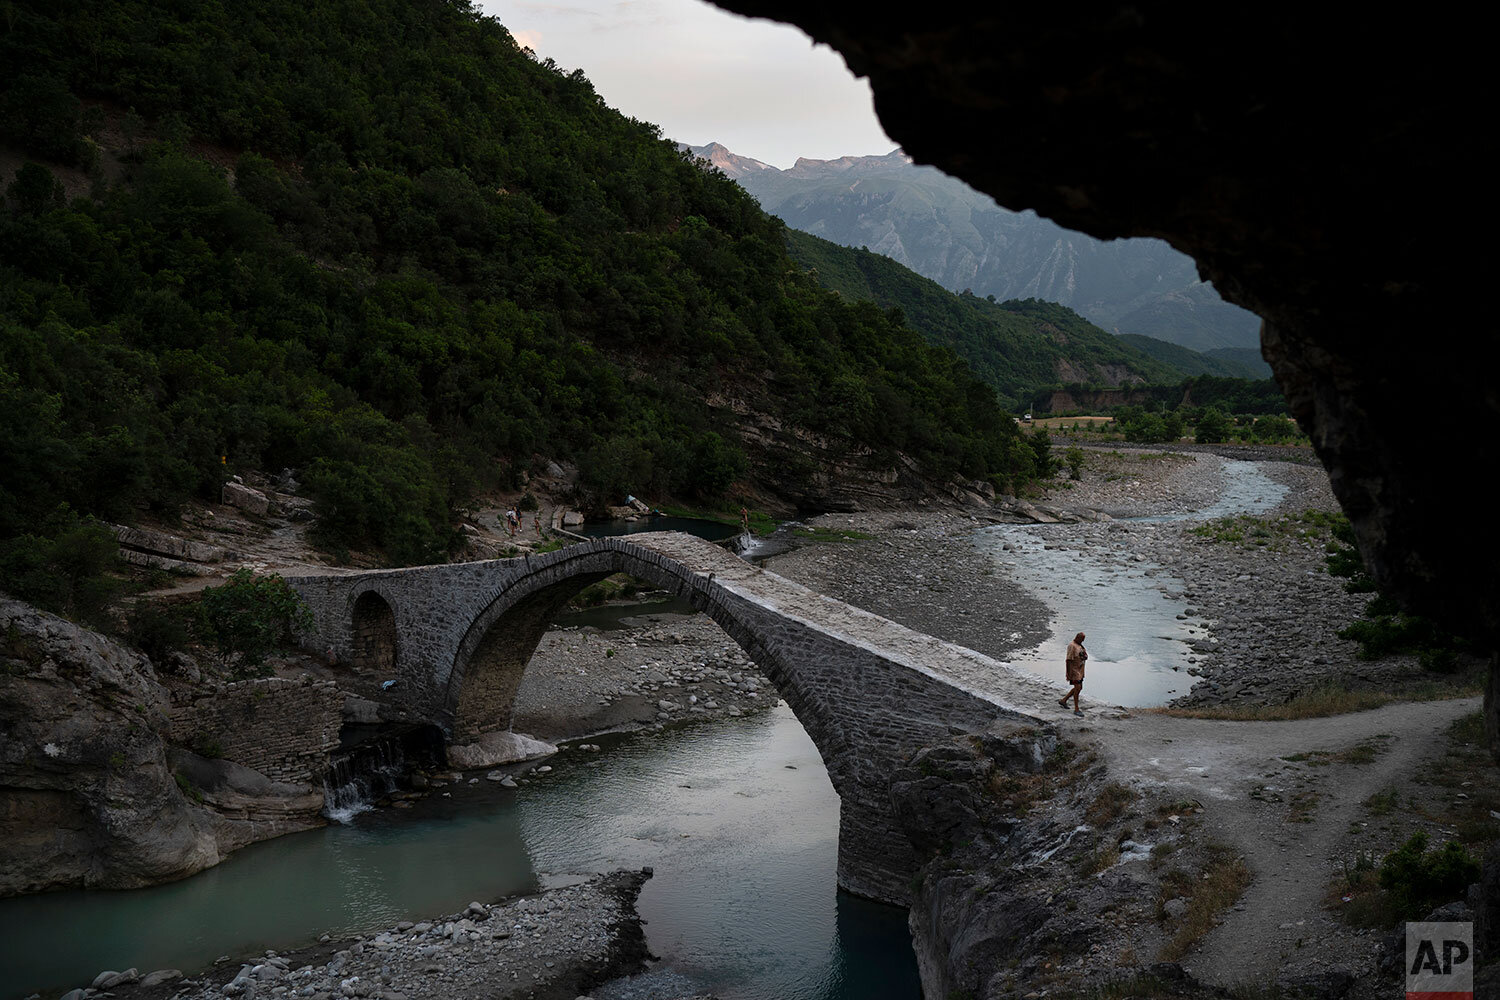  In this June 18, 2019 photo, a man crosses a bridge over the Langarica River, a tributary to the Vjosa near the city of Permet, Albania. Albania's government has set in motion plans to dam the Vjosa and its tributaries to generate much-needed electr